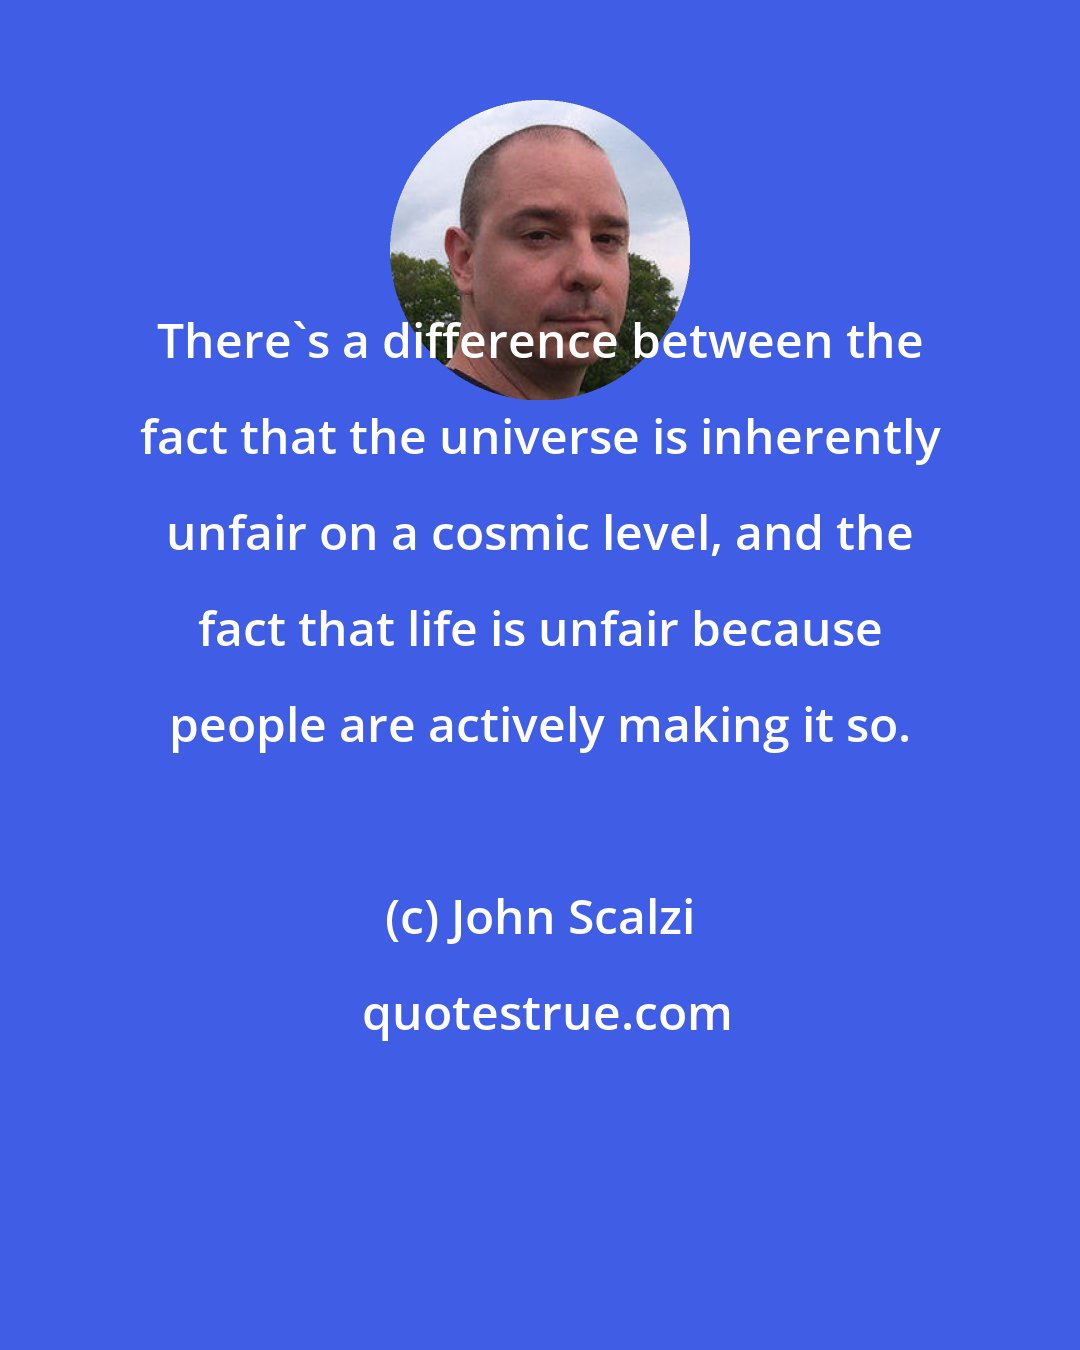 John Scalzi: There's a difference between the fact that the universe is inherently unfair on a cosmic level, and the fact that life is unfair because people are actively making it so.